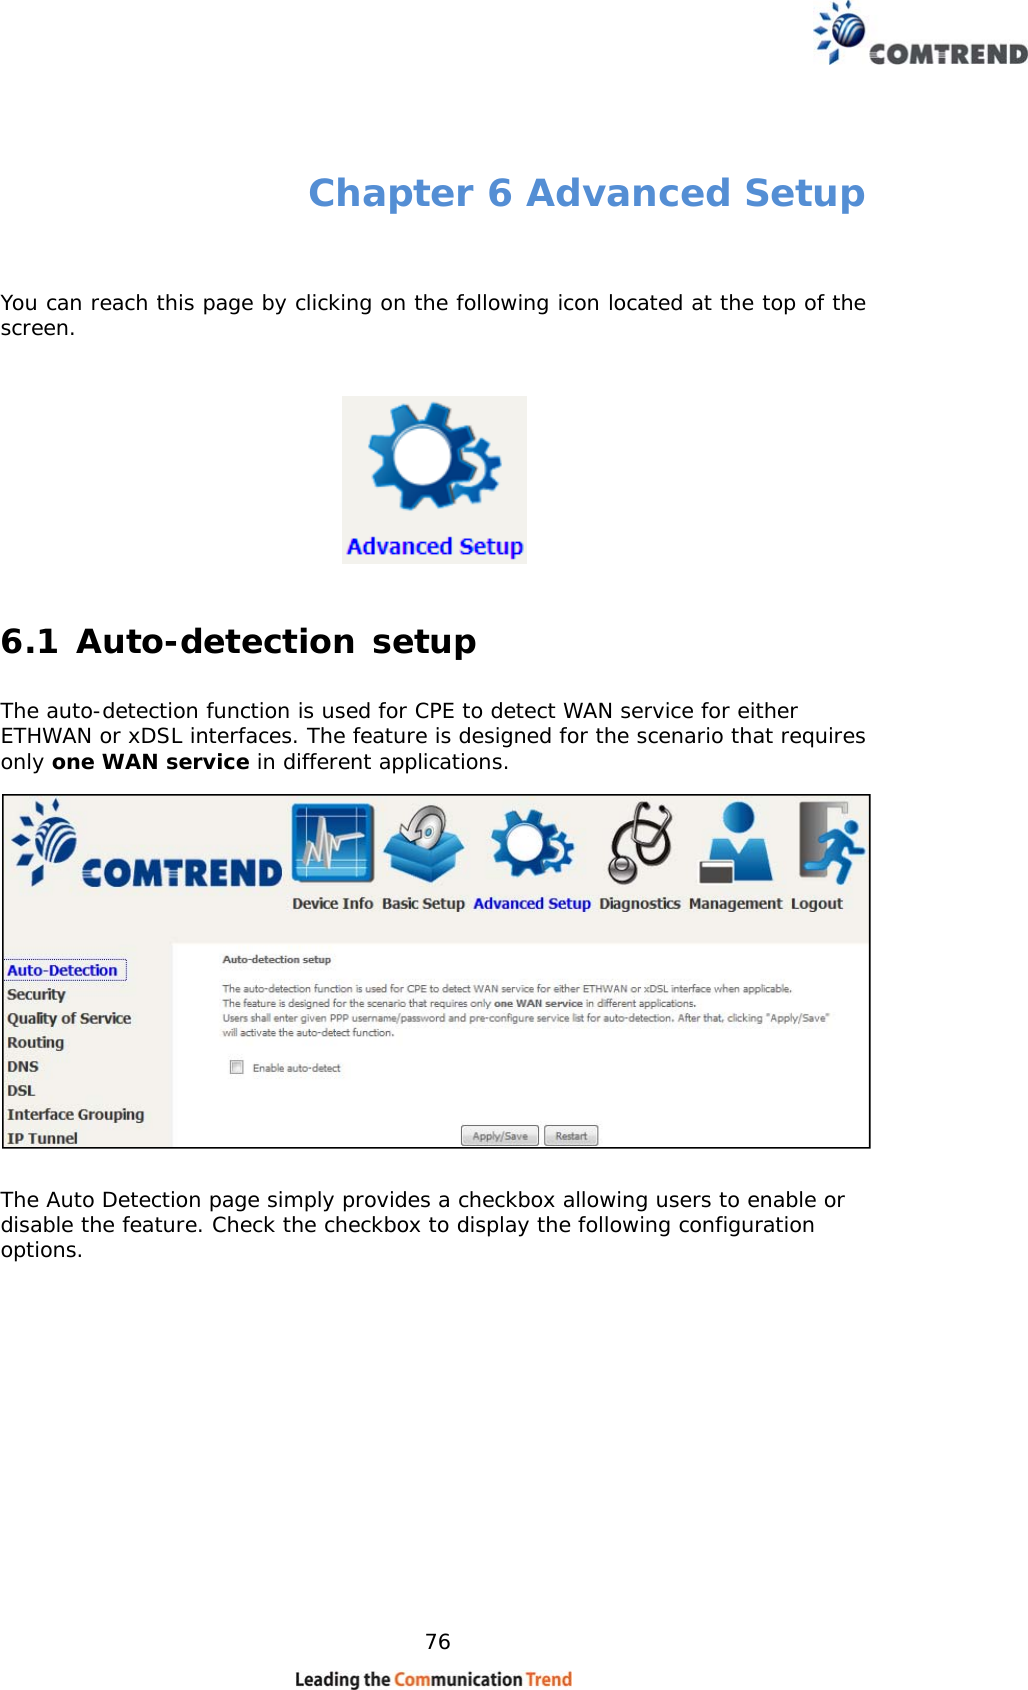    76 Chapter 6 Advanced Setup  You can reach this page by clicking on the following icon located at the top of the screen.  6.1 Auto-detection setup The auto-detection function is used for CPE to detect WAN service for either ETHWAN or xDSL interfaces. The feature is designed for the scenario that requires only one WAN service in different applications.   The Auto Detection page simply provides a checkbox allowing users to enable or disable the feature. Check the checkbox to display the following configuration options.            